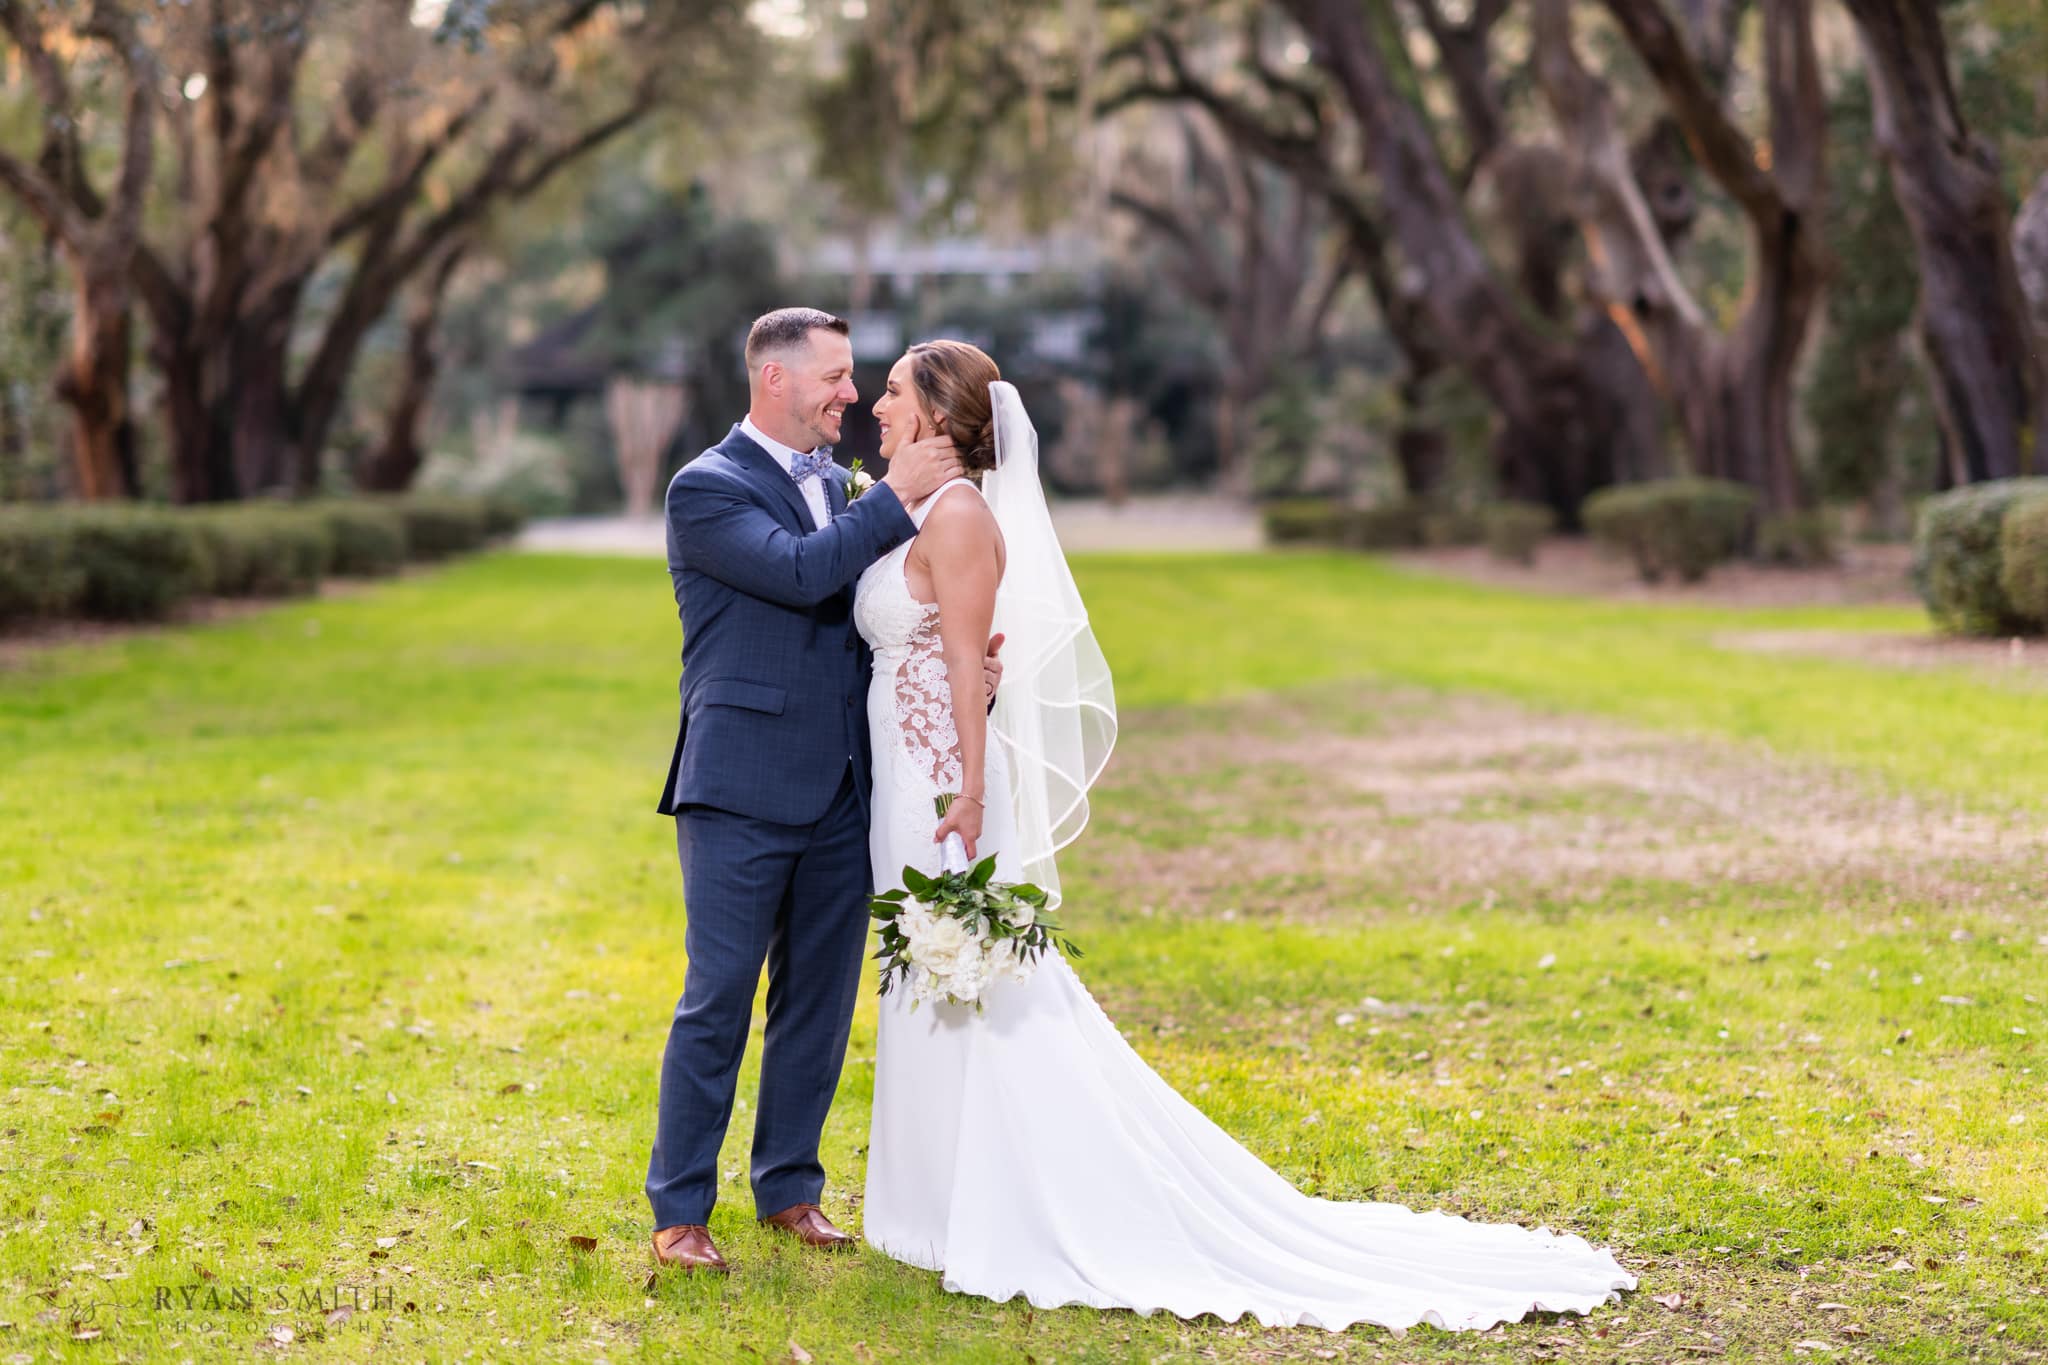 Portraits of the bride and groom on the Oak Allee  - Kimbels at Wachesaw Plantation